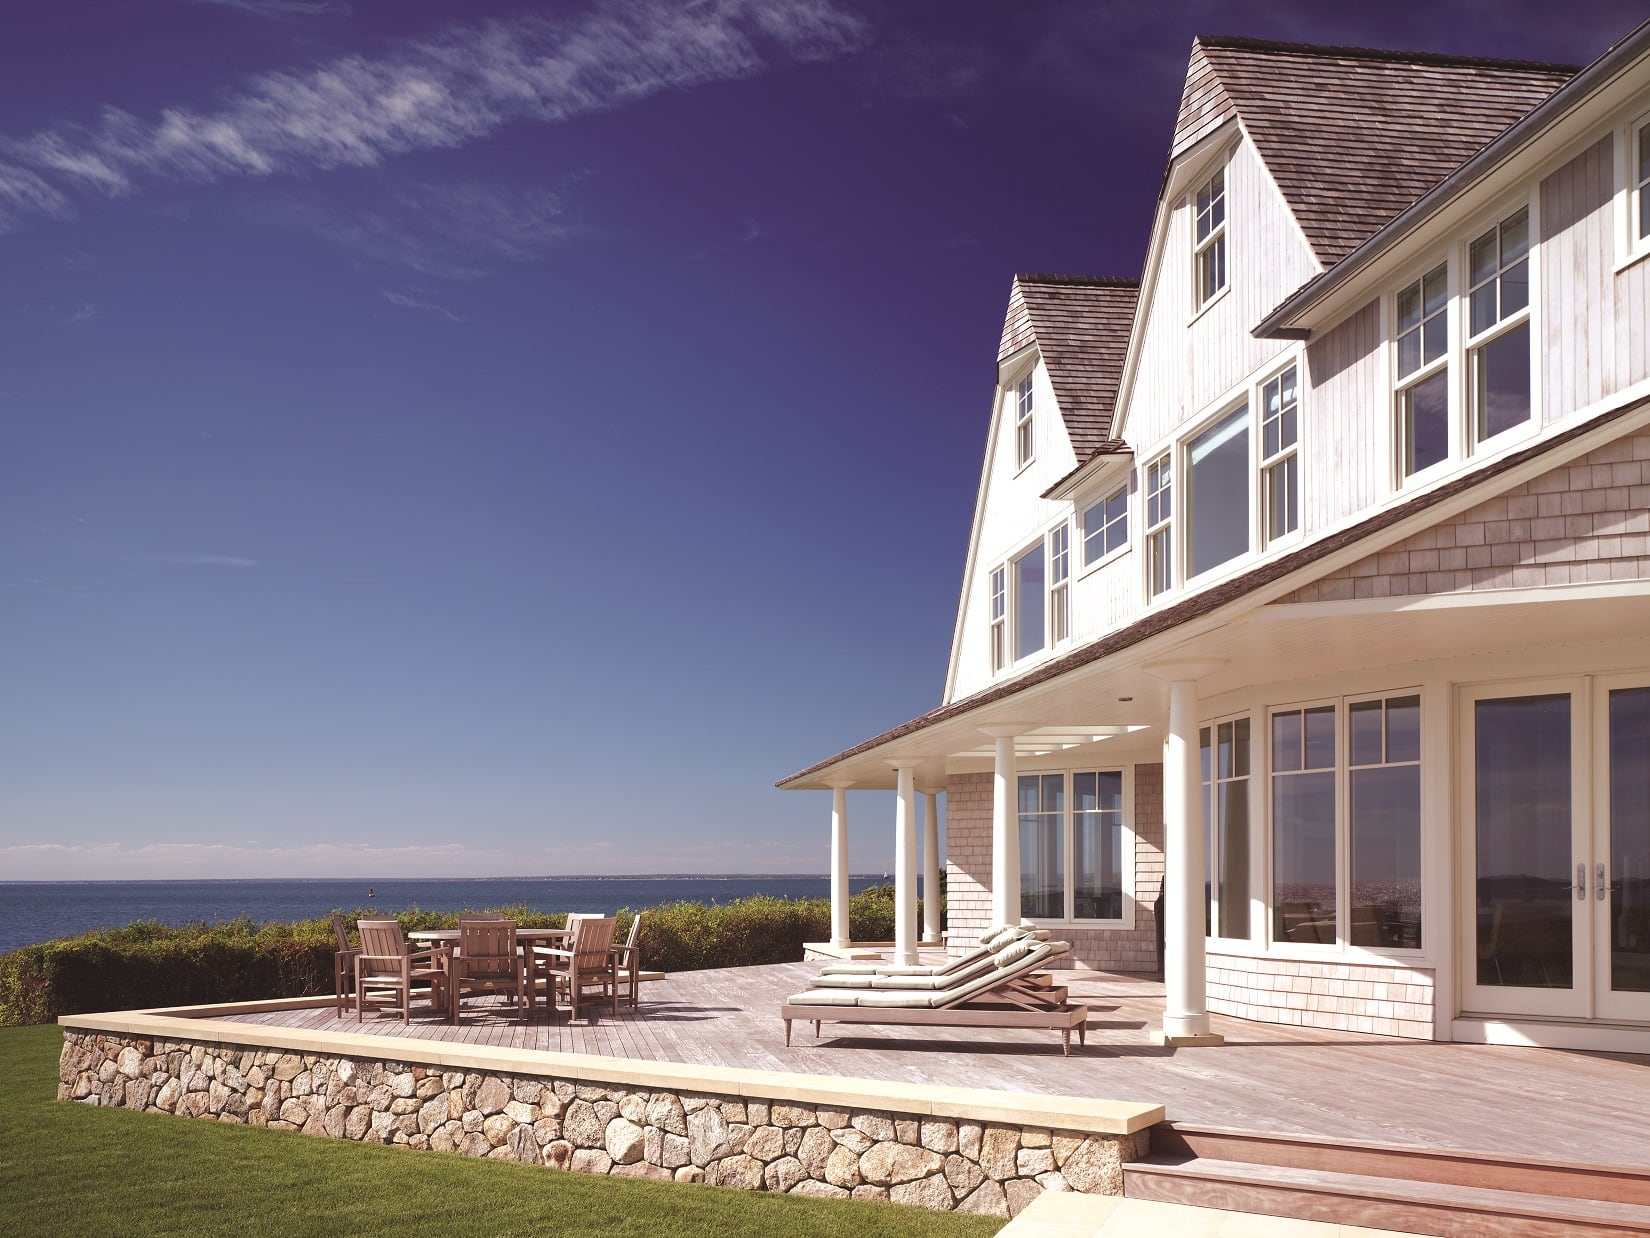 Seaside Shingle Style - Residential Architecture